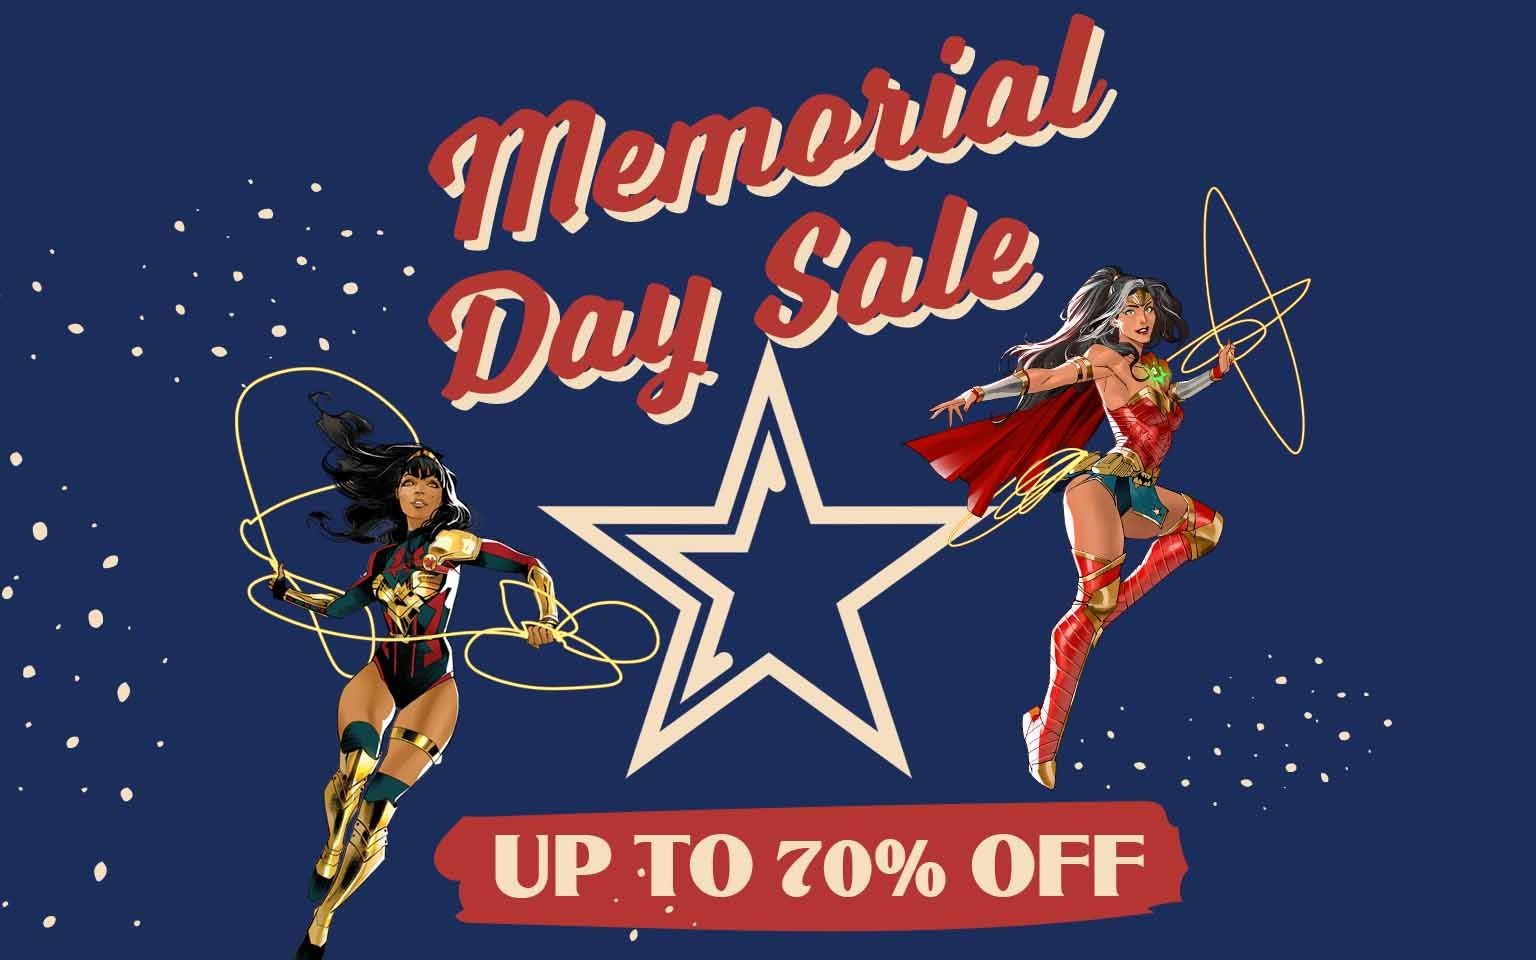 Memorial Day Sale Up to 70% off